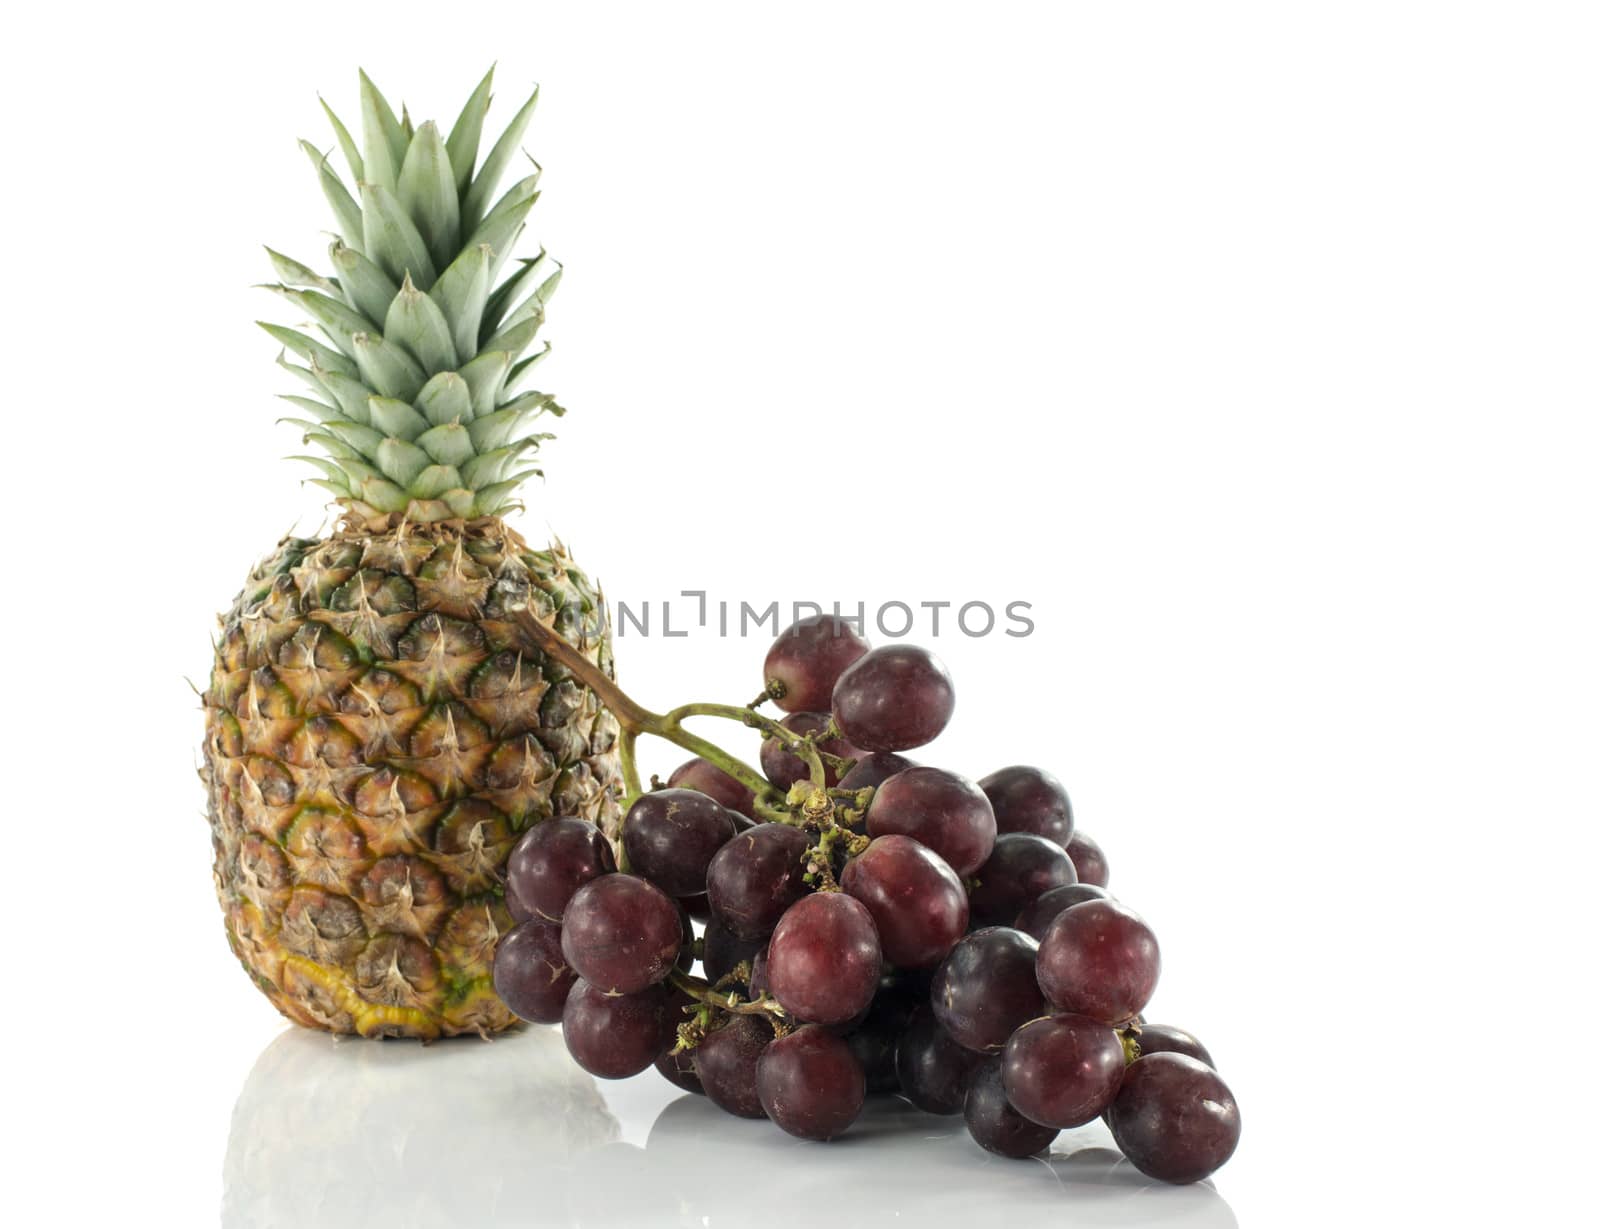 pineaple and red grapes  by compuinfoto